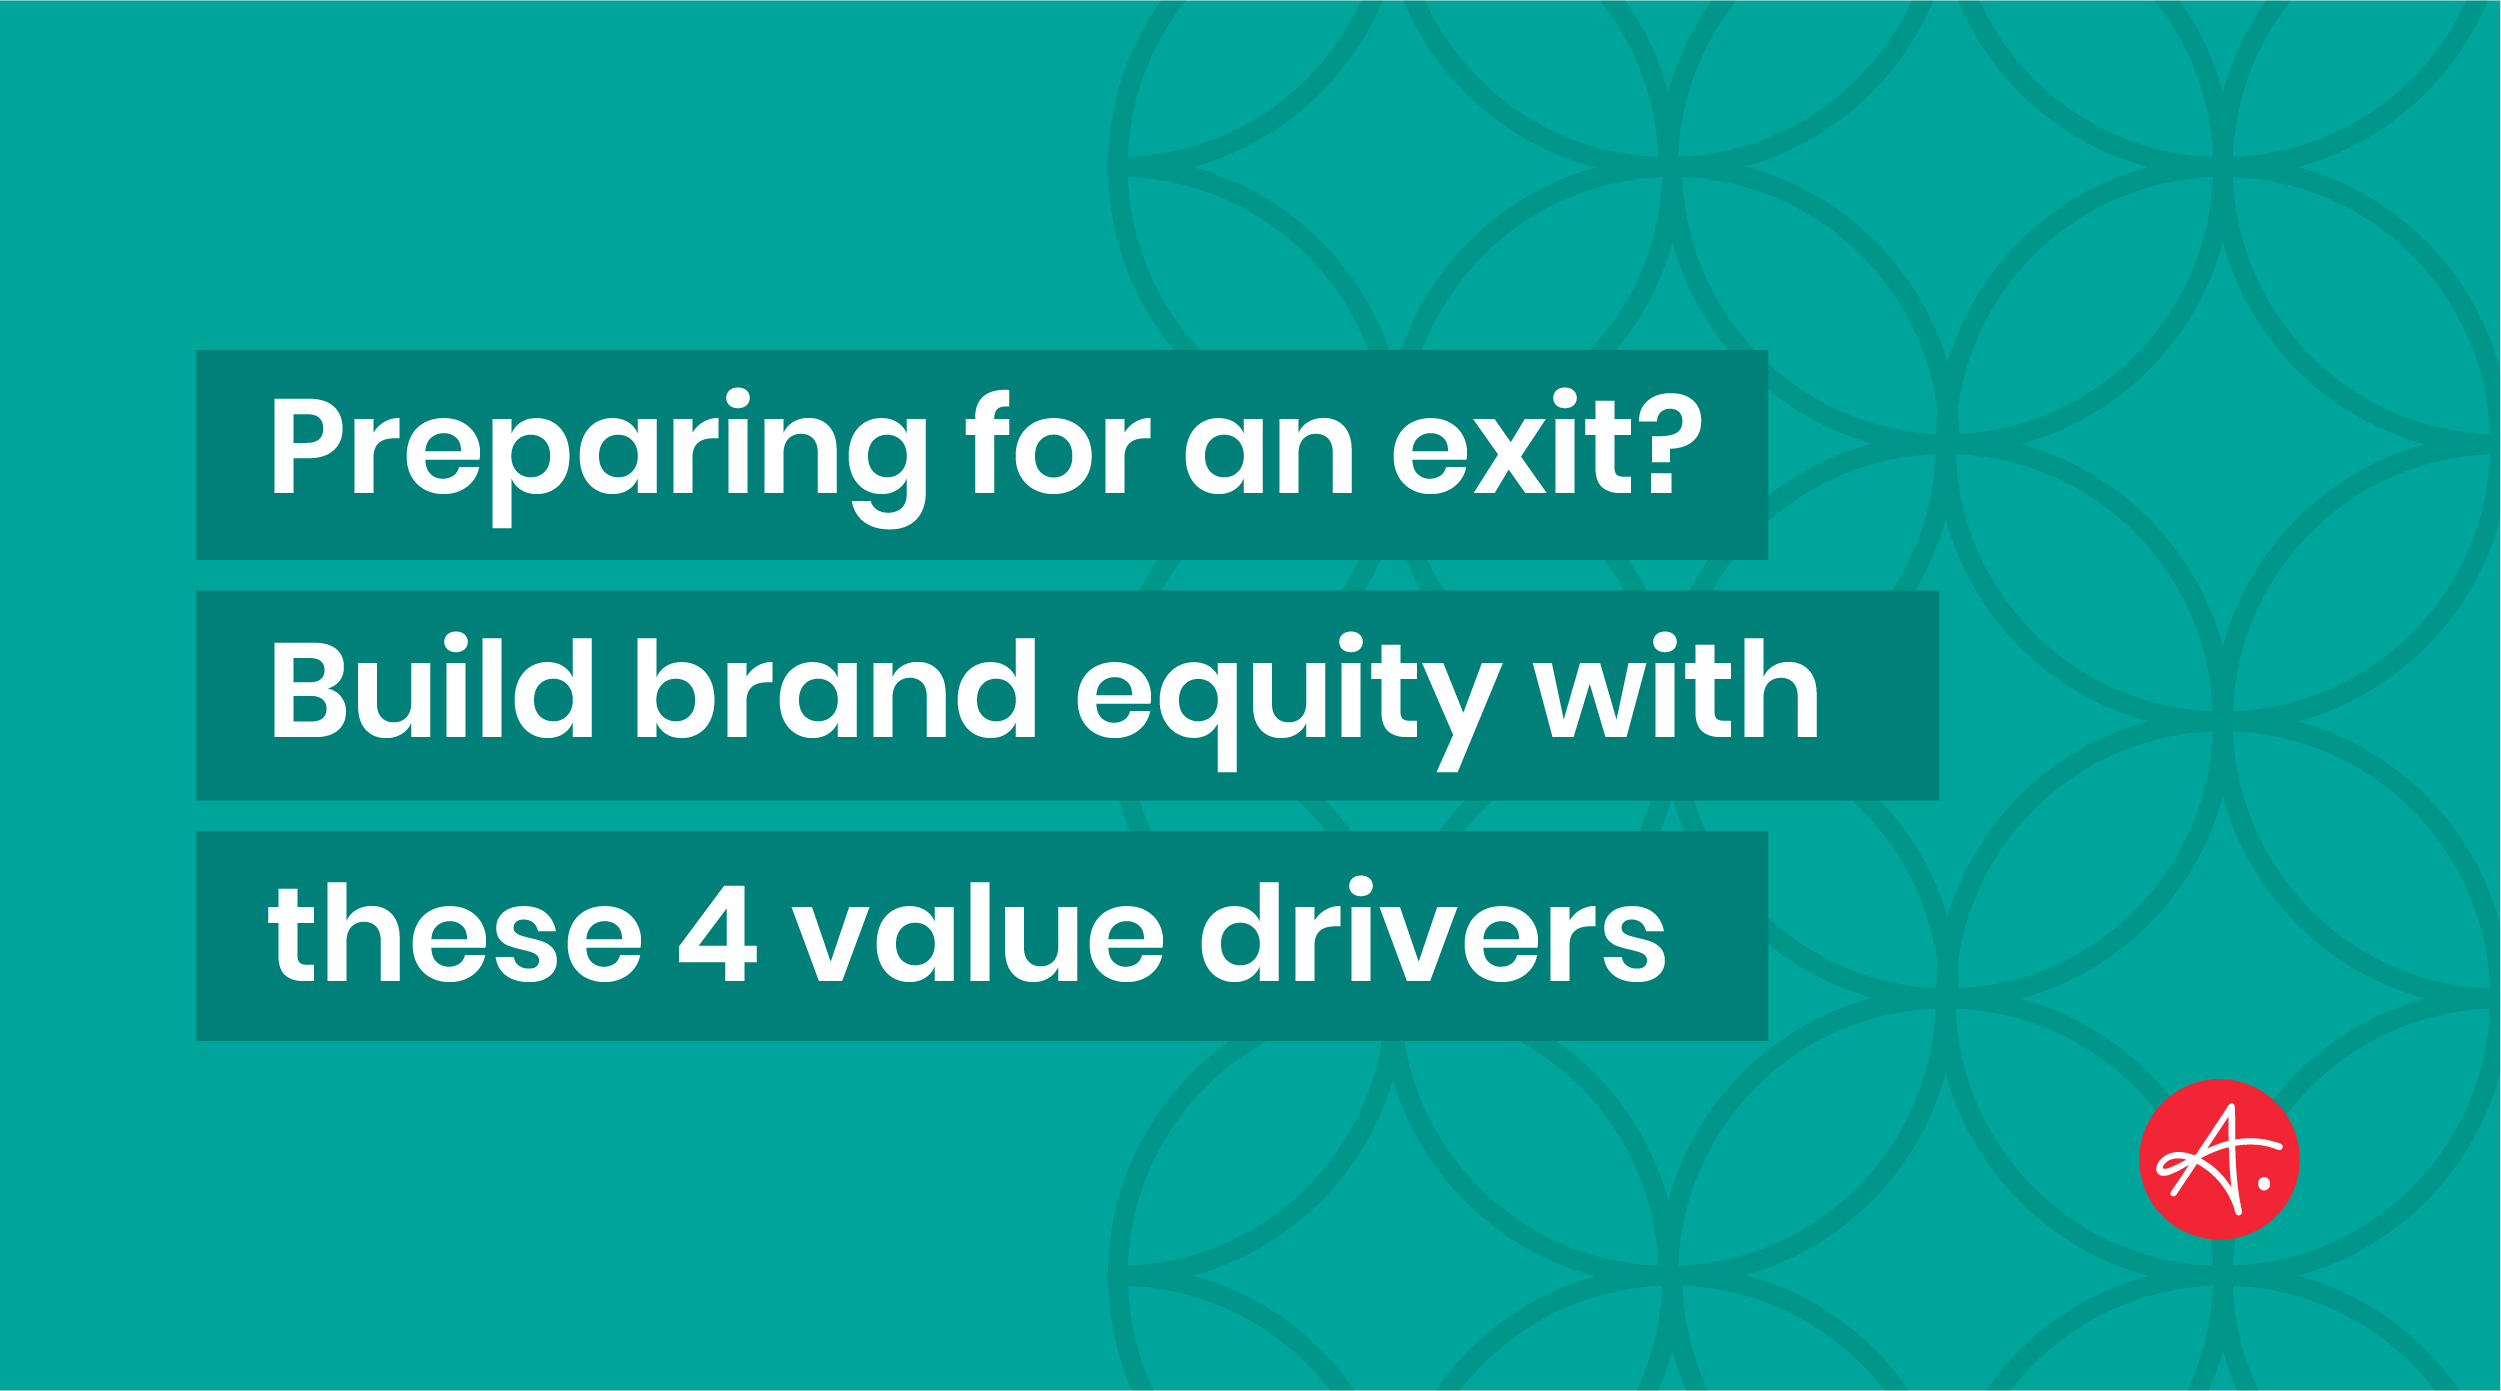 Preparing for an exit? Build brand equity with these 4 value drivers